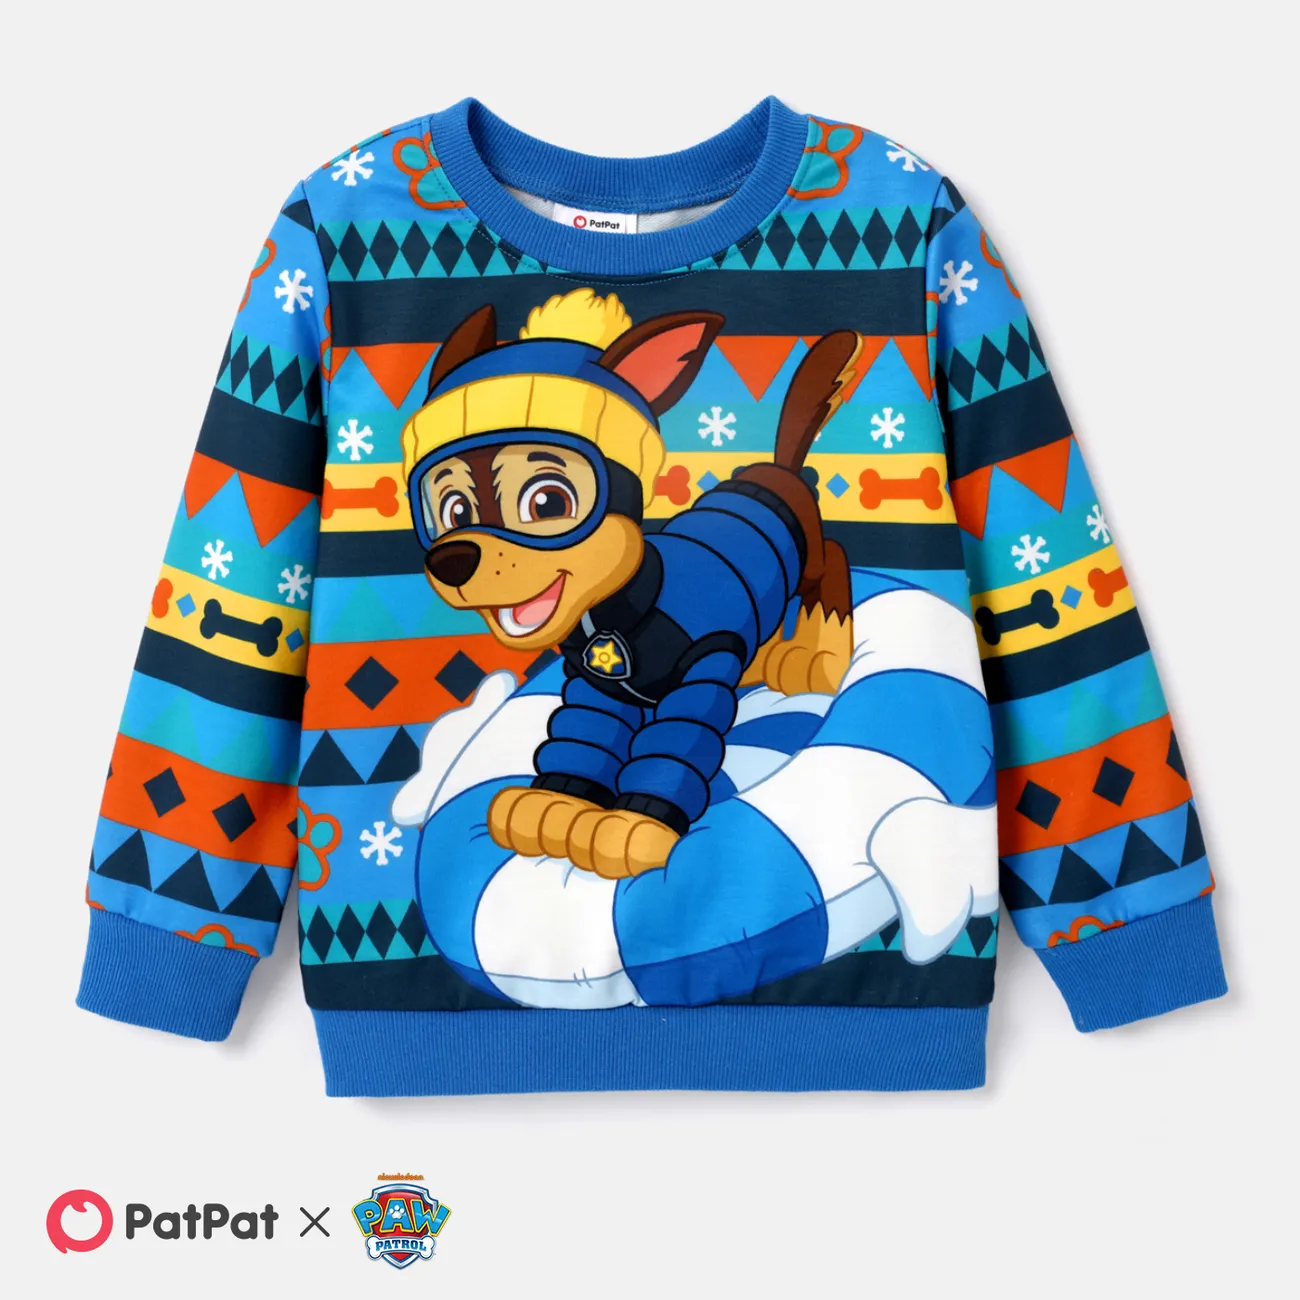 Pullover US Toddler Only PAW Sweatshirt Long-sleeve Mobile Print Girl/Boy Patrol $9.99 PatPat Character